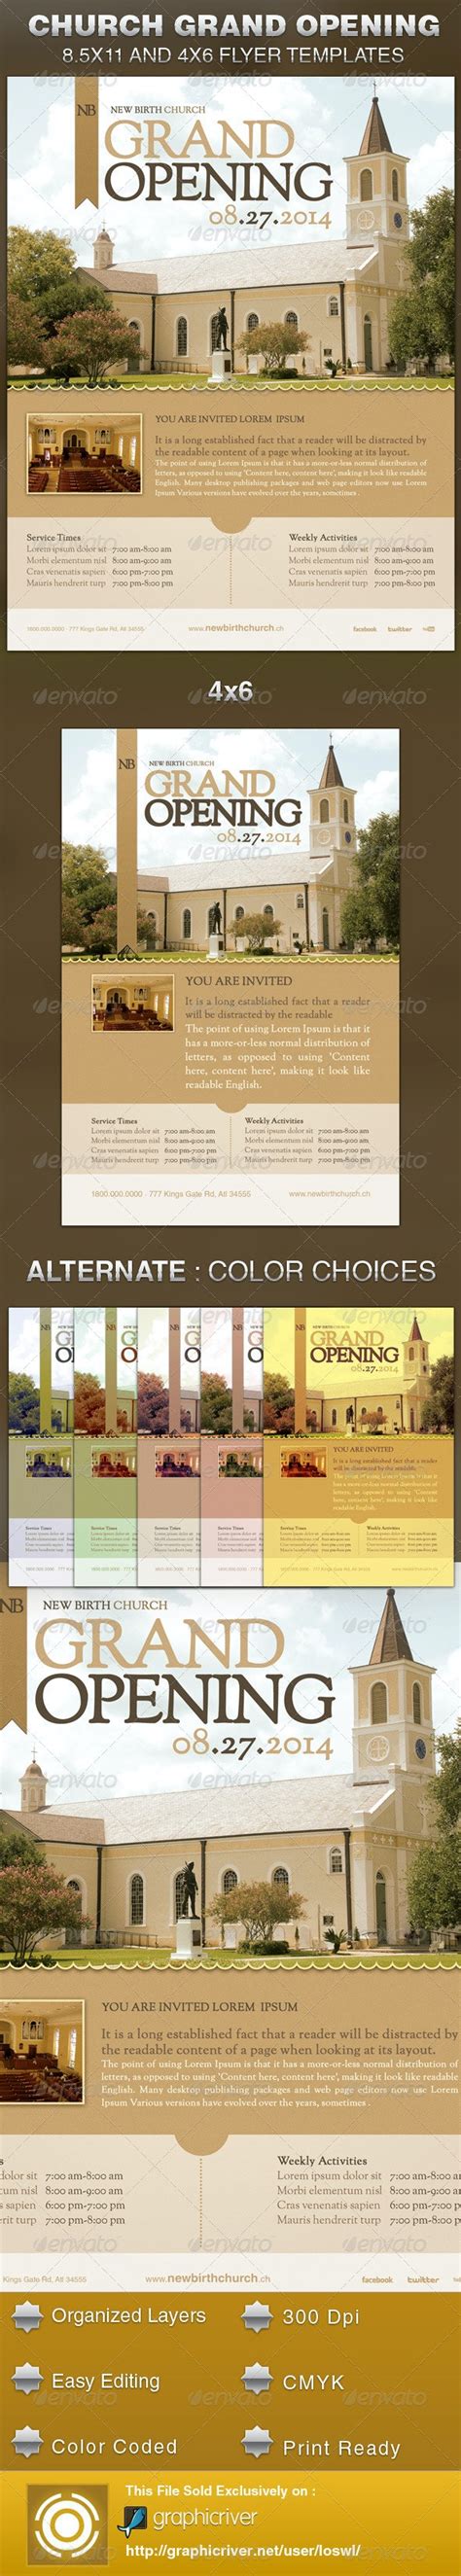 Church Grand Opening Flyer Template By Loswl Graphicriver